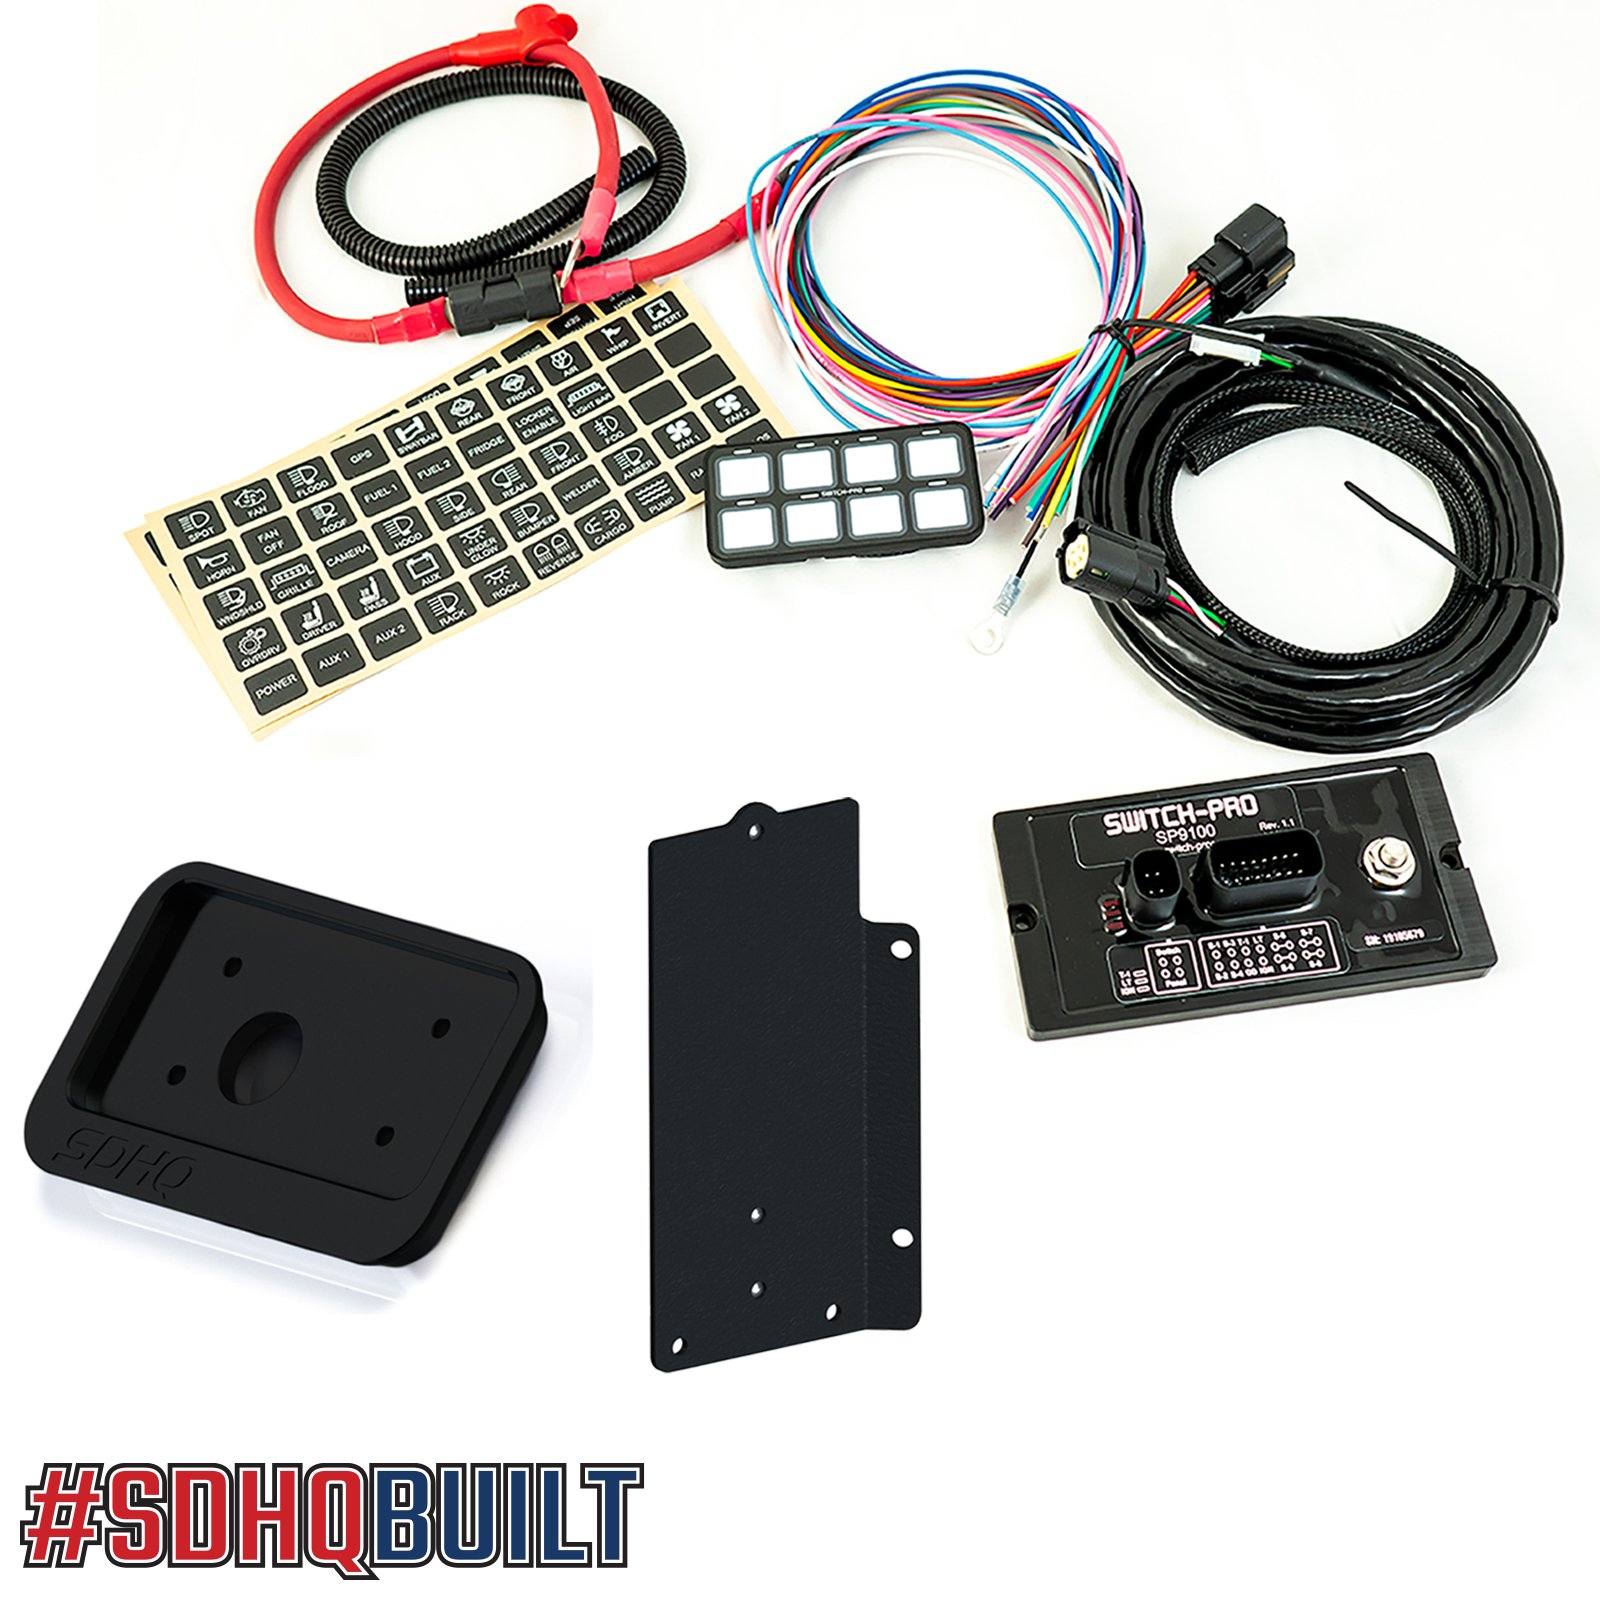 '14-20 Toyota Tundra SDHQ Built Complete Switch Pros Mounting Kit Lighting SDHQ Off Road